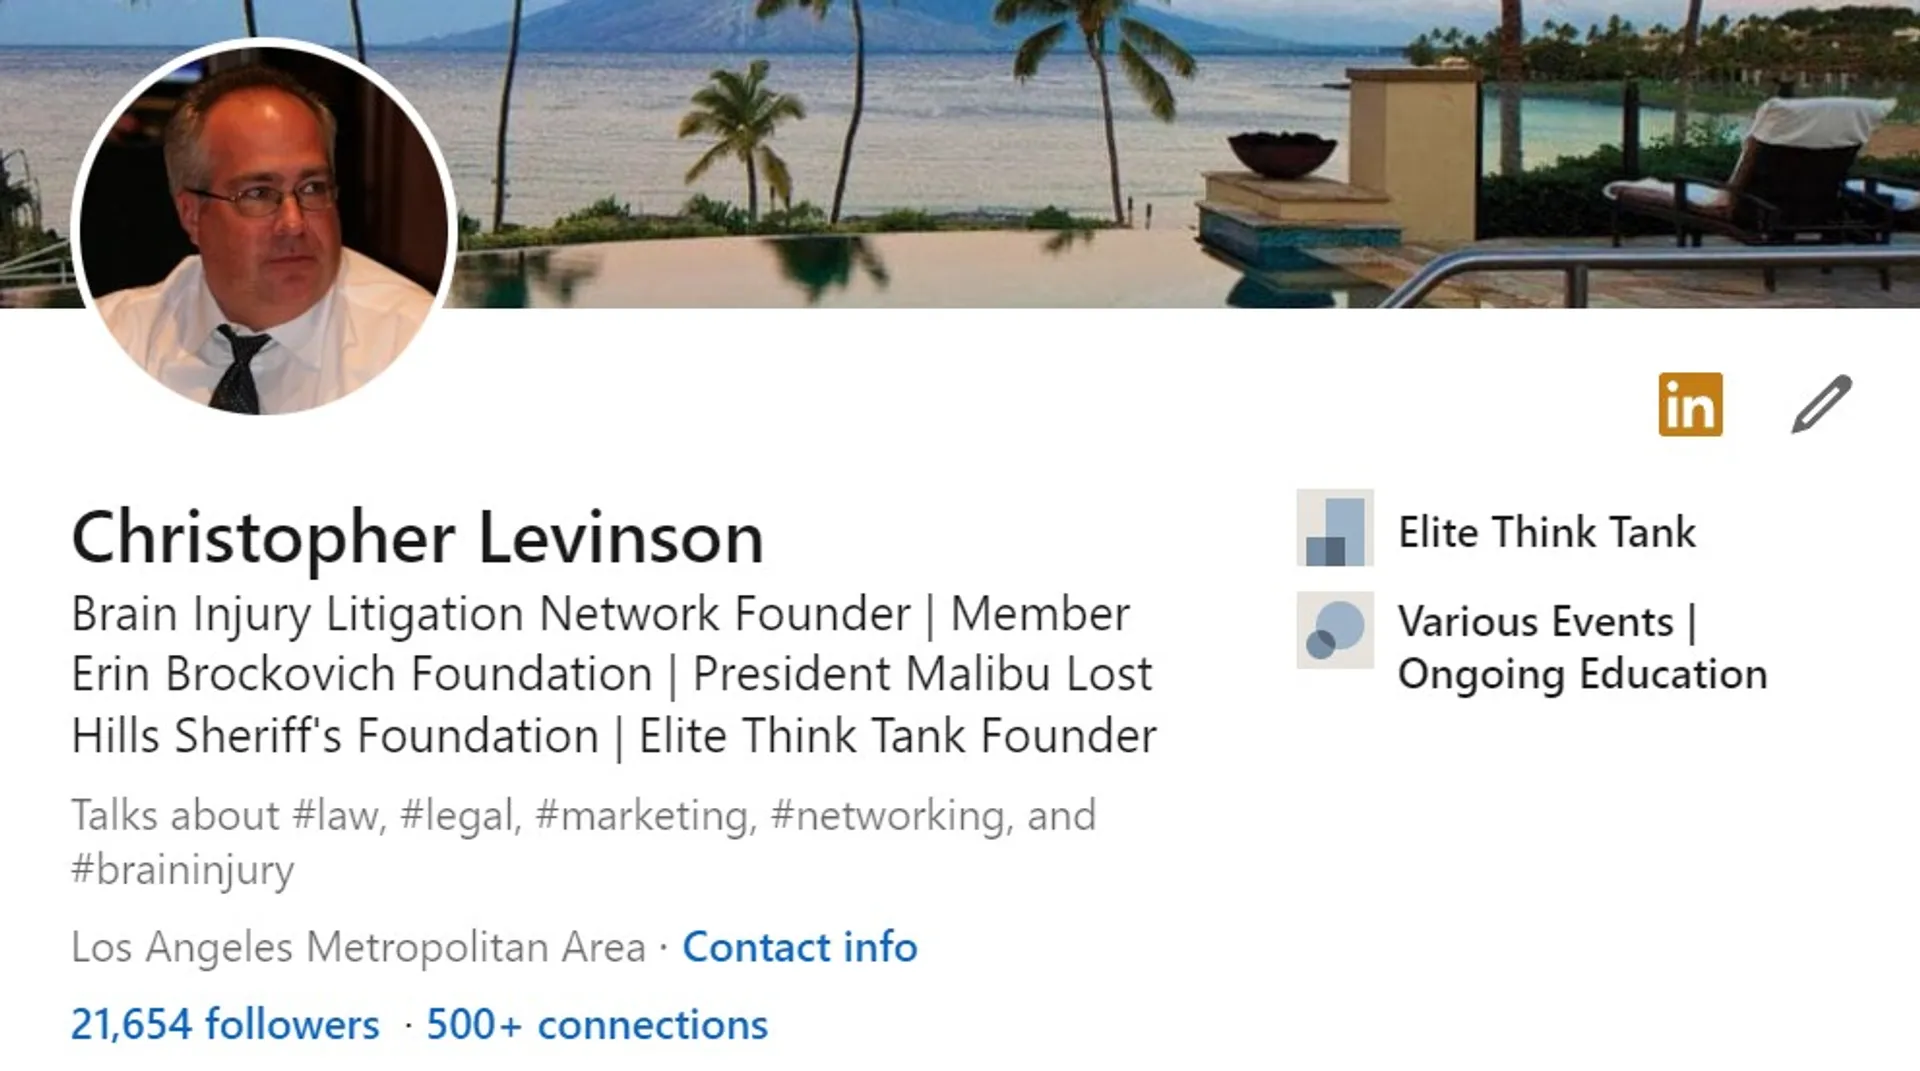 Are We Connected On LinkedIn - Feel Free To Follow Me For Great Updates & Worthwhile Information https://www.linkedin.com/in/chrislevinson/

#Technology  #Law  #Medicine  #BrainInjury  #Aviation  #Environment  #ArtifialIntelligence  #Marketing  #Networking  #LawFirms  #Attorneys  #Education  #News  